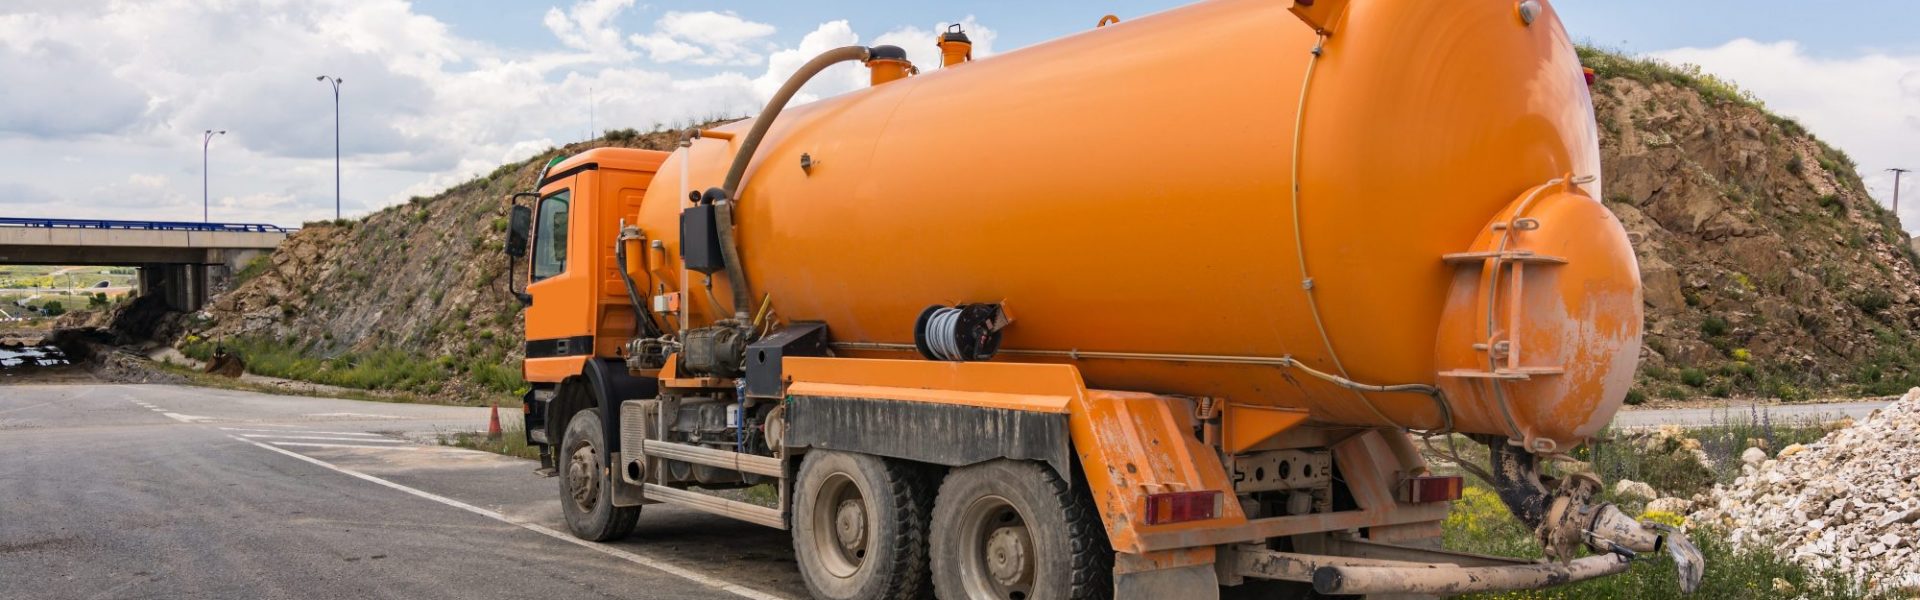 Tank truck to transport water or liquids for construction